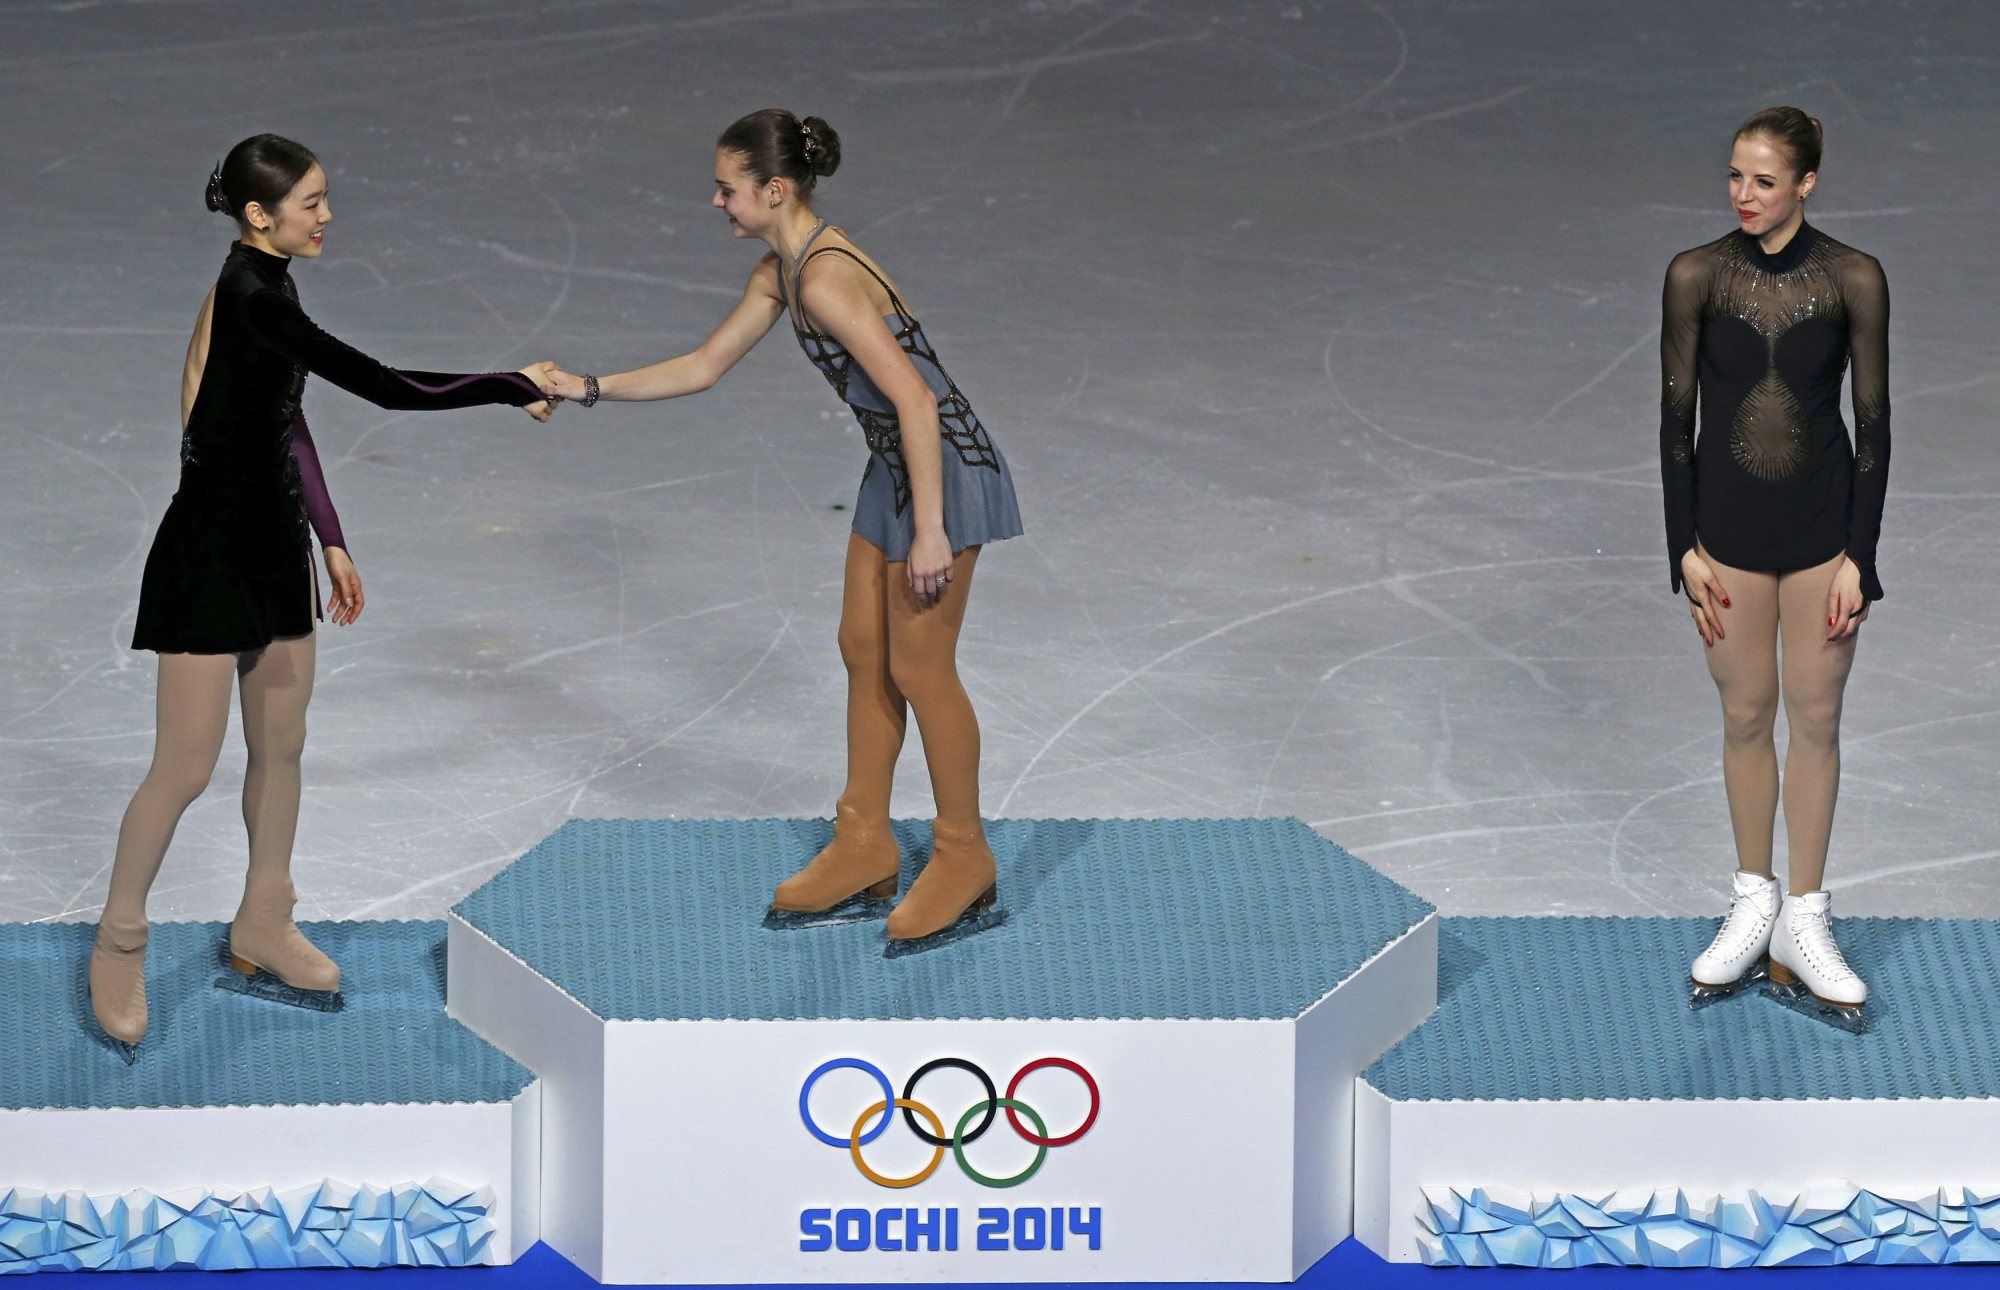 First-placed Russia's Adelina Sotnikova (C) shakes hands with second-placed South Korea's Kim Yuna (L) as third-placed Italy's Carolina Kostner looks on, on the podium after the figure skating women's free skating program.